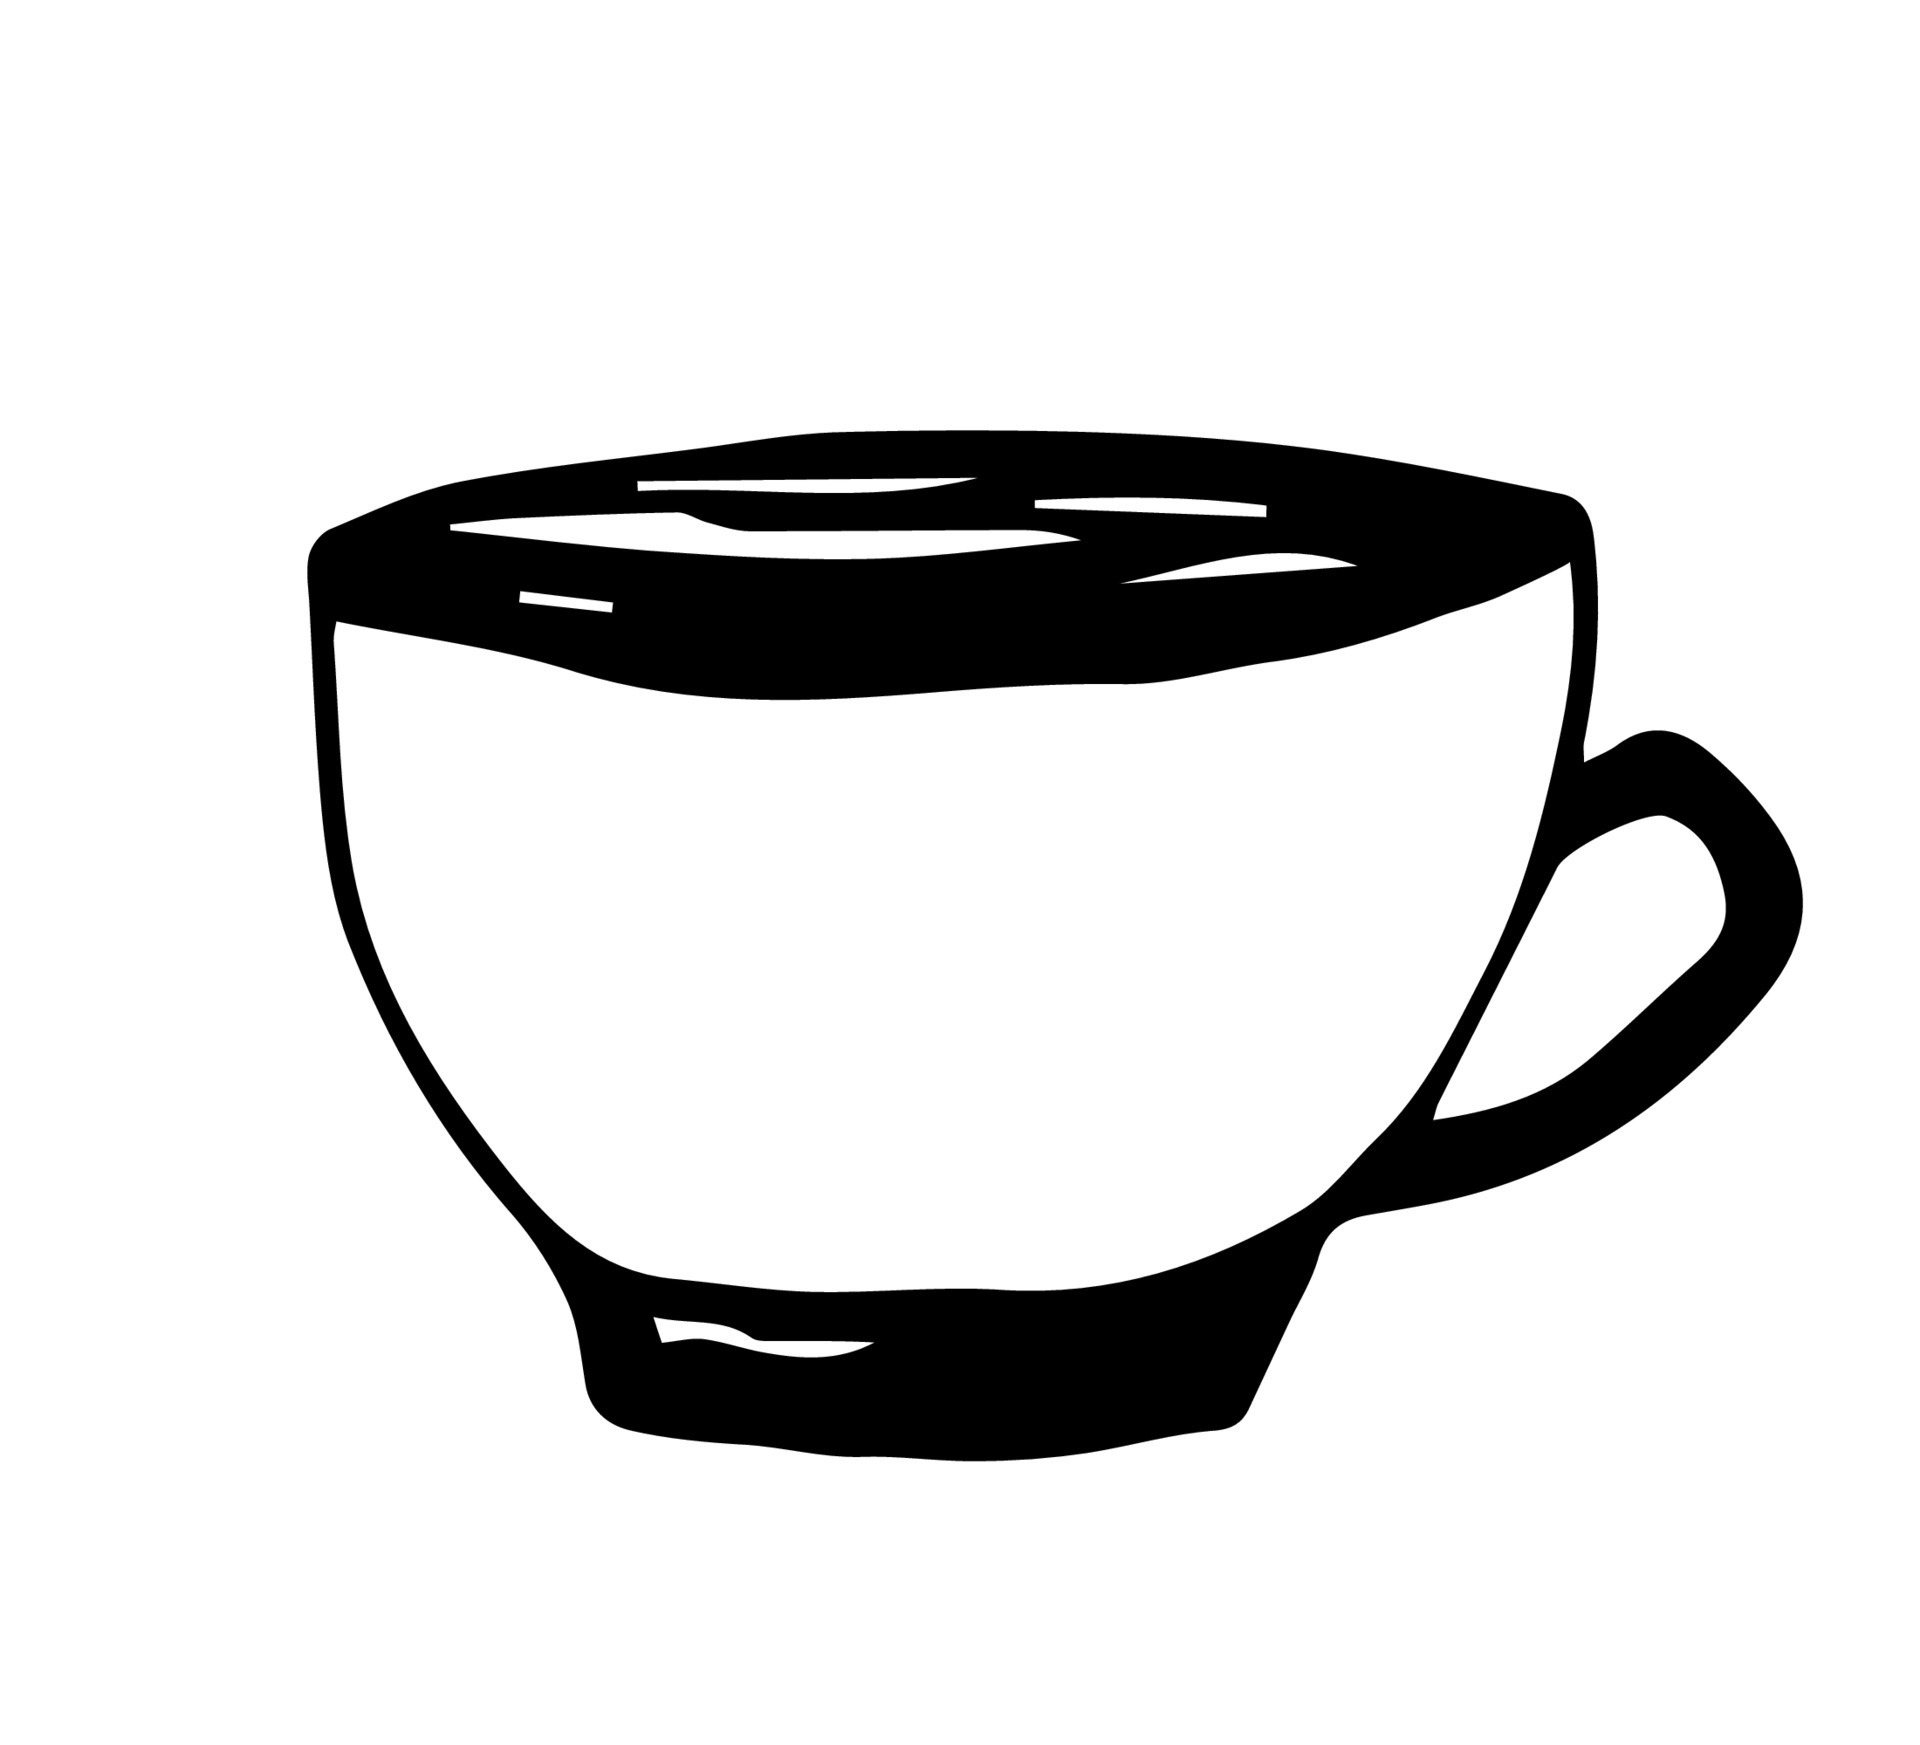 How to Draw a Mug Step by Step - EasyLineDrawing